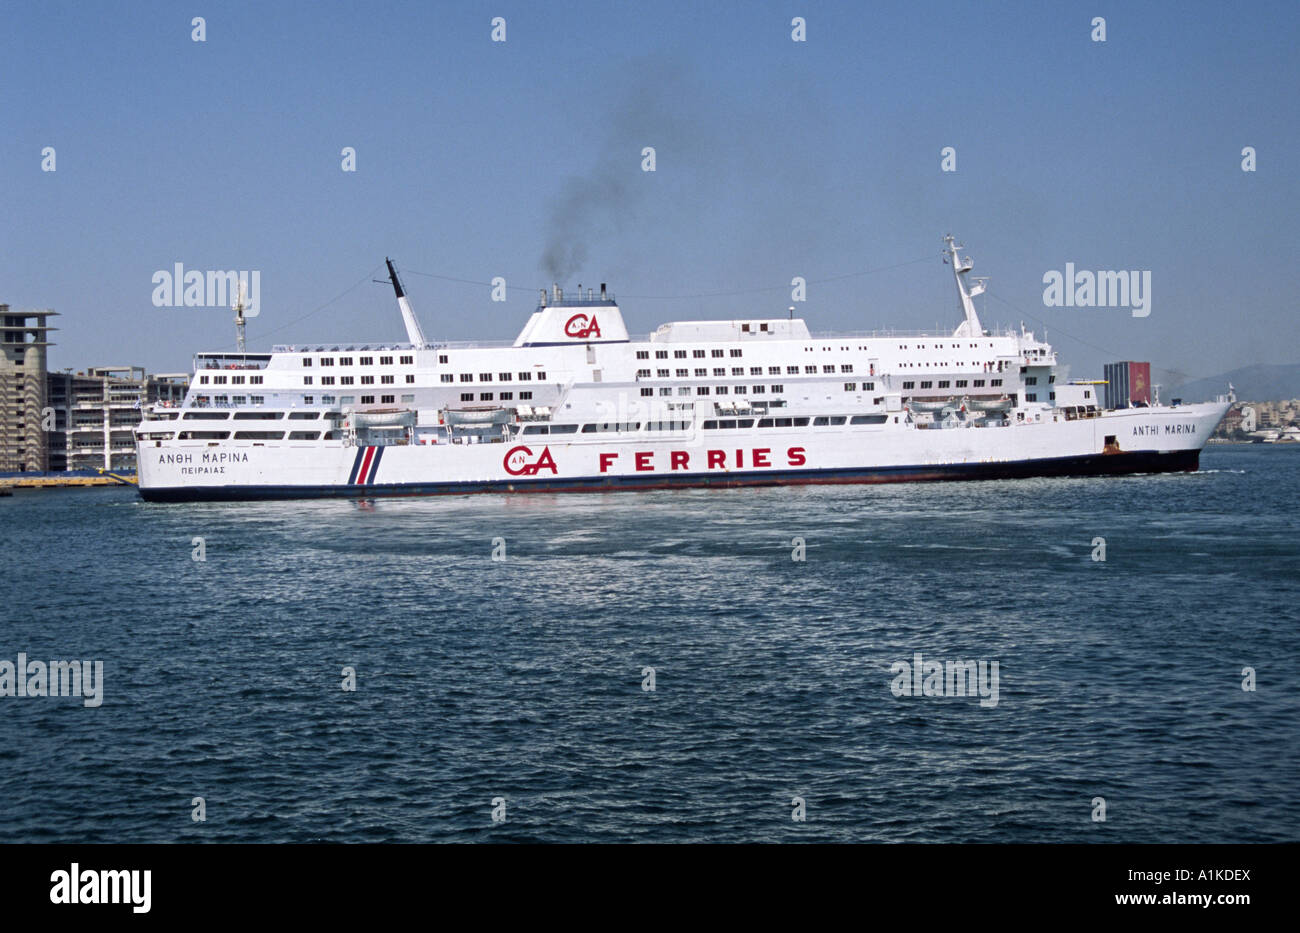 Anthi Marina Greek GA Ferries ferry at Piraeus. This is the former Pride of Kent of P&O from Dover-Calais Stock Photo